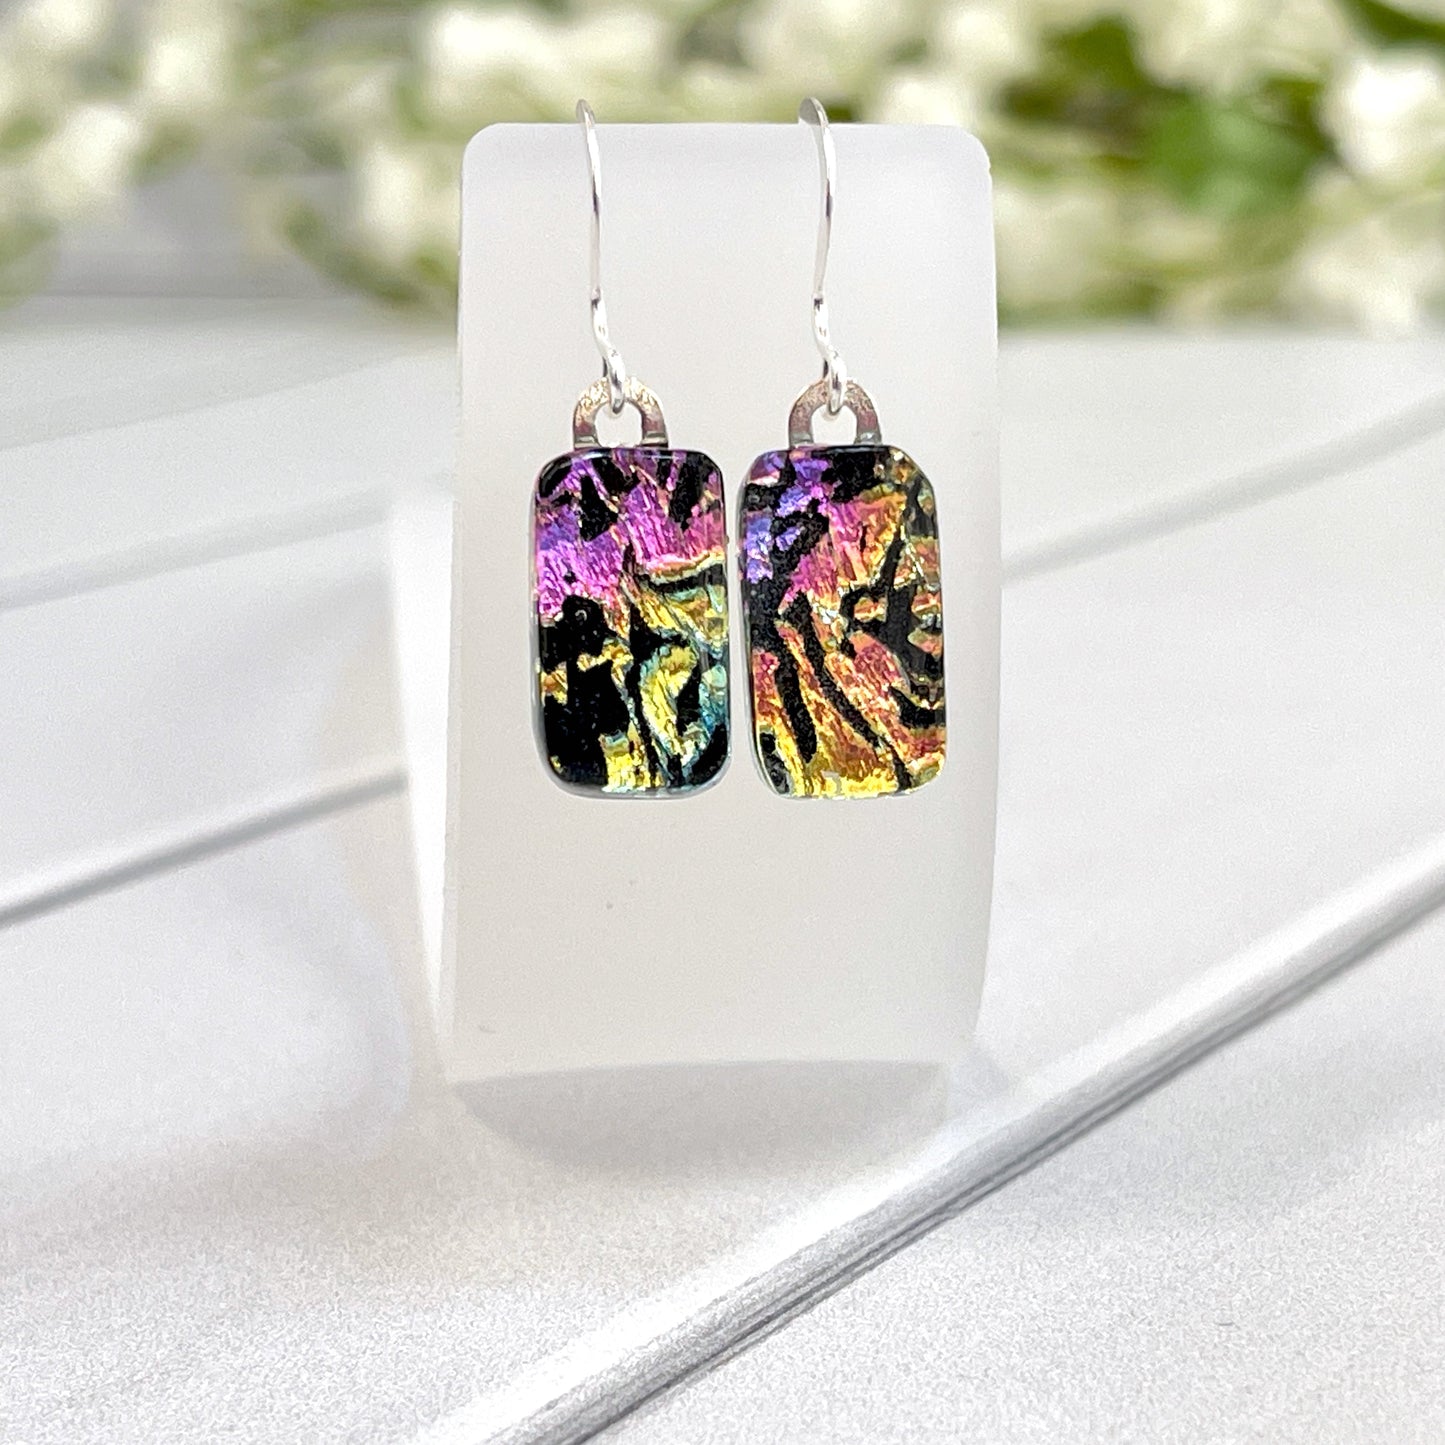 Exploding Dichroic Fused Glass Earrings - 3998